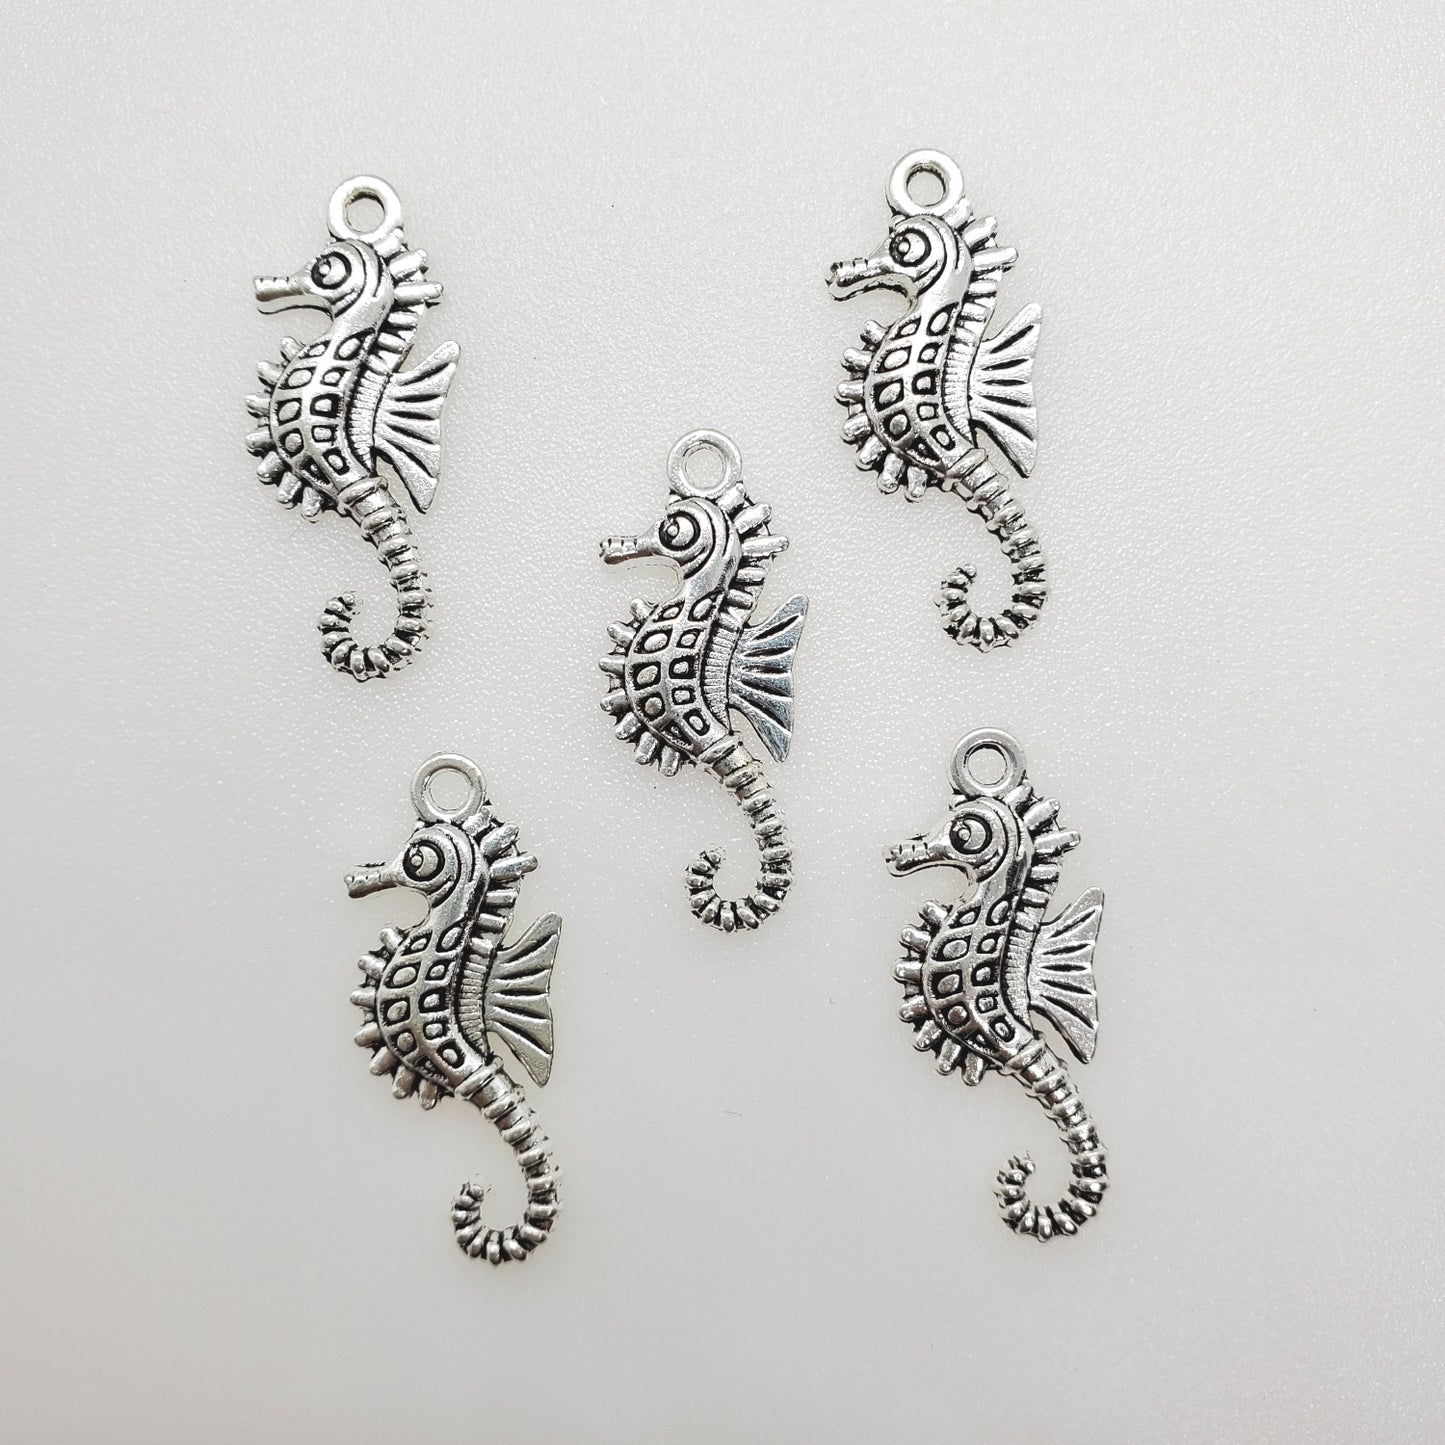 Seahorse Charms (5)